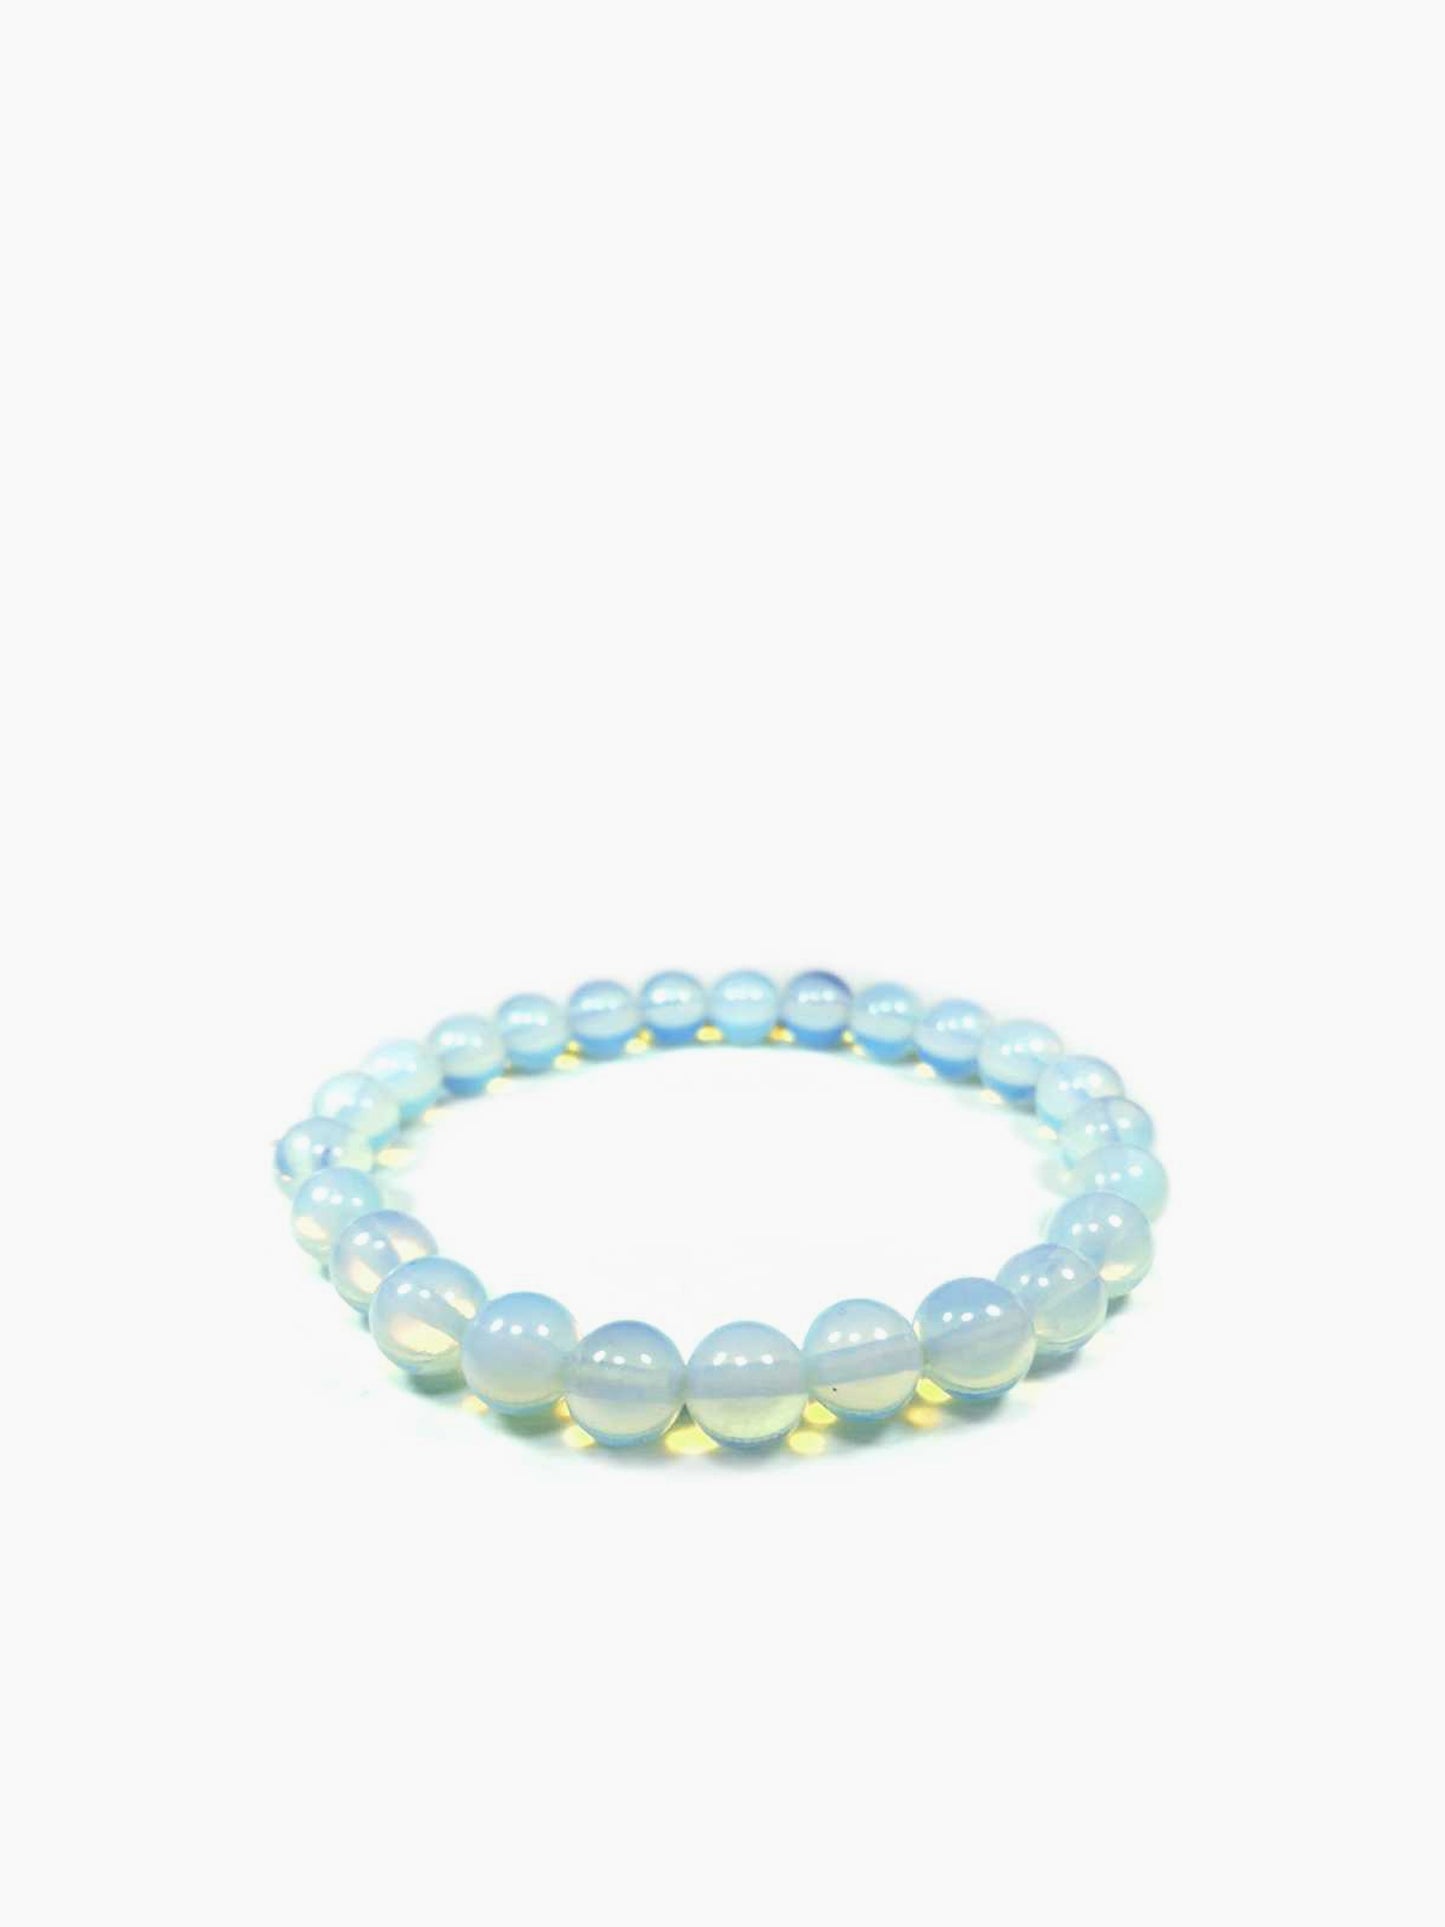 Opalite ~ Power, Courage and Success Bracelet